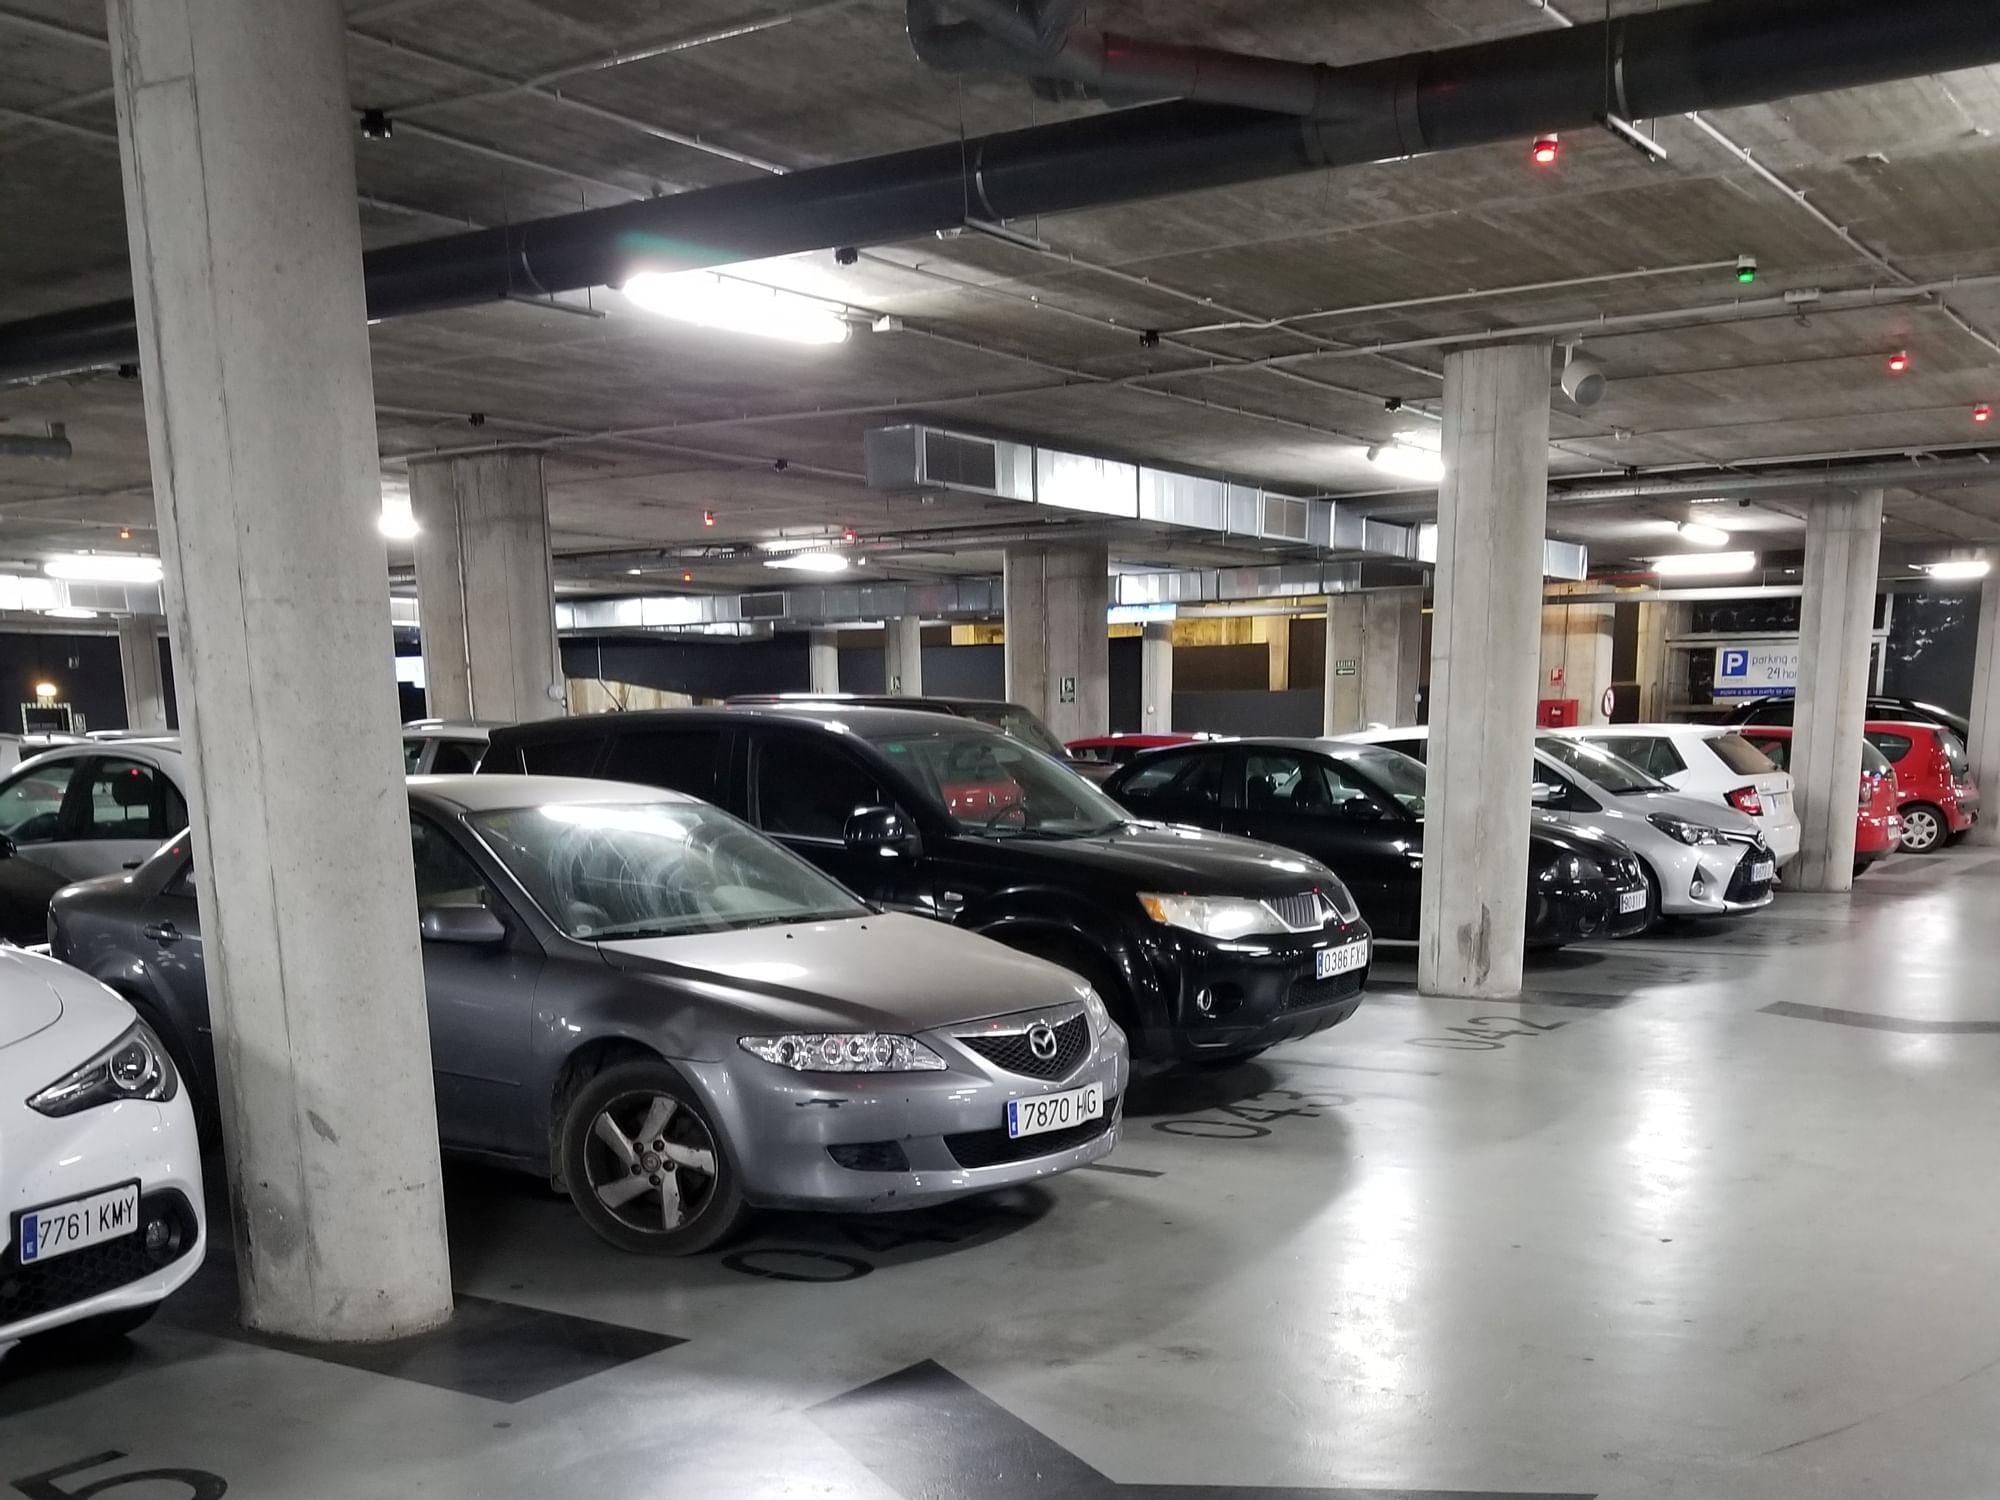 Cars parked in the underground car park at Nita Lake Lodge